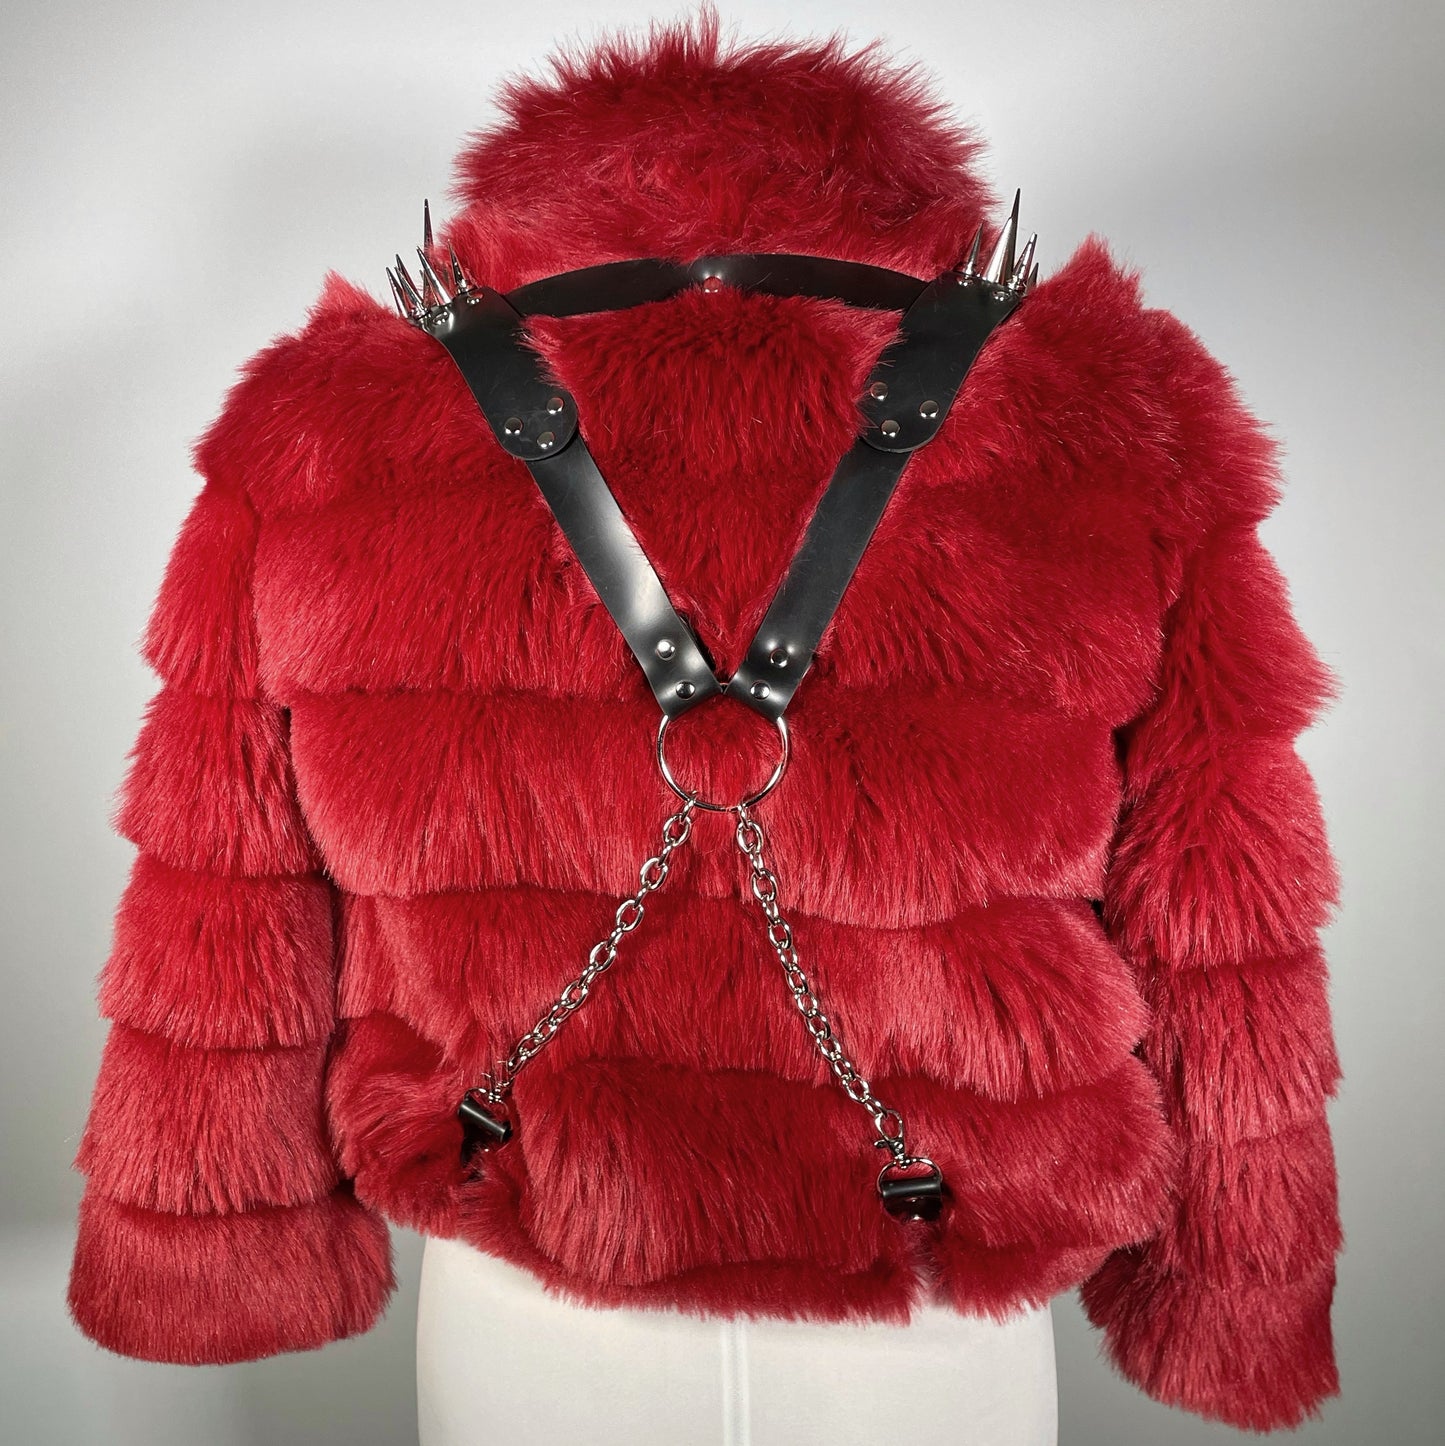 Red Faux Fur Cropped Jacket with Black Spiked Harness